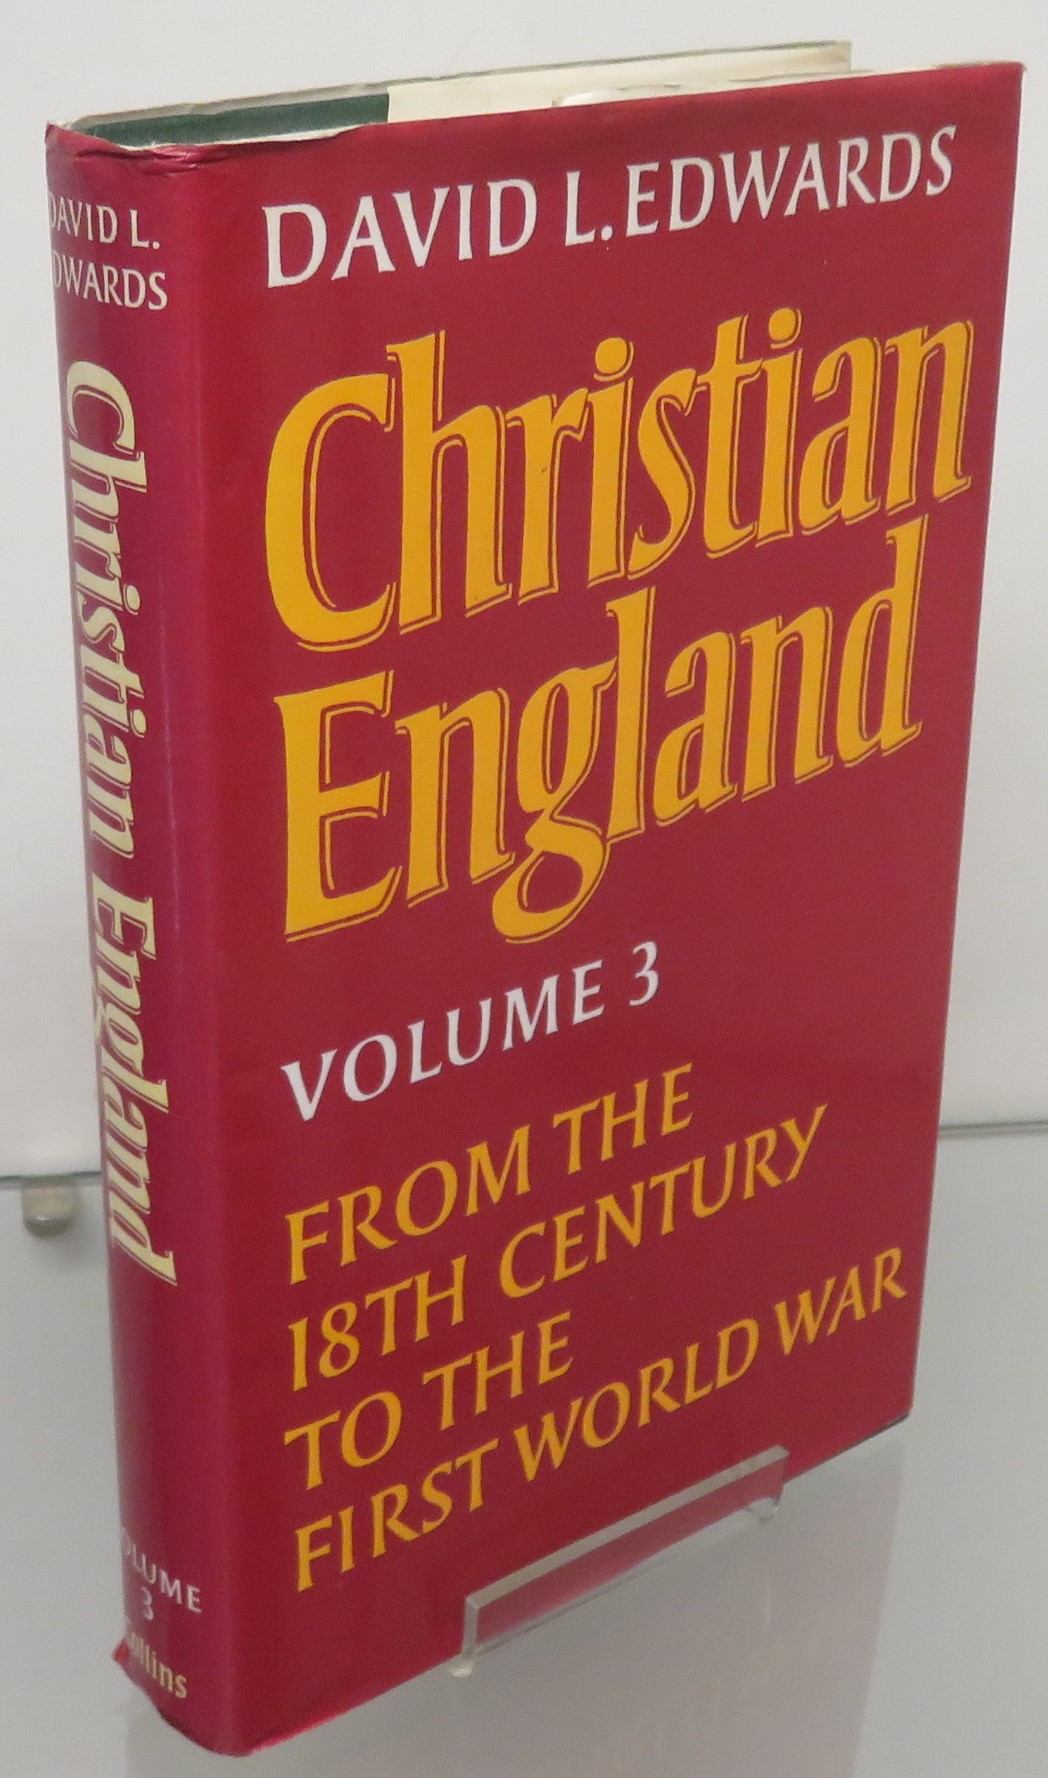 Christian England (Volume 3: From the Eighteenth Century to the First World War)